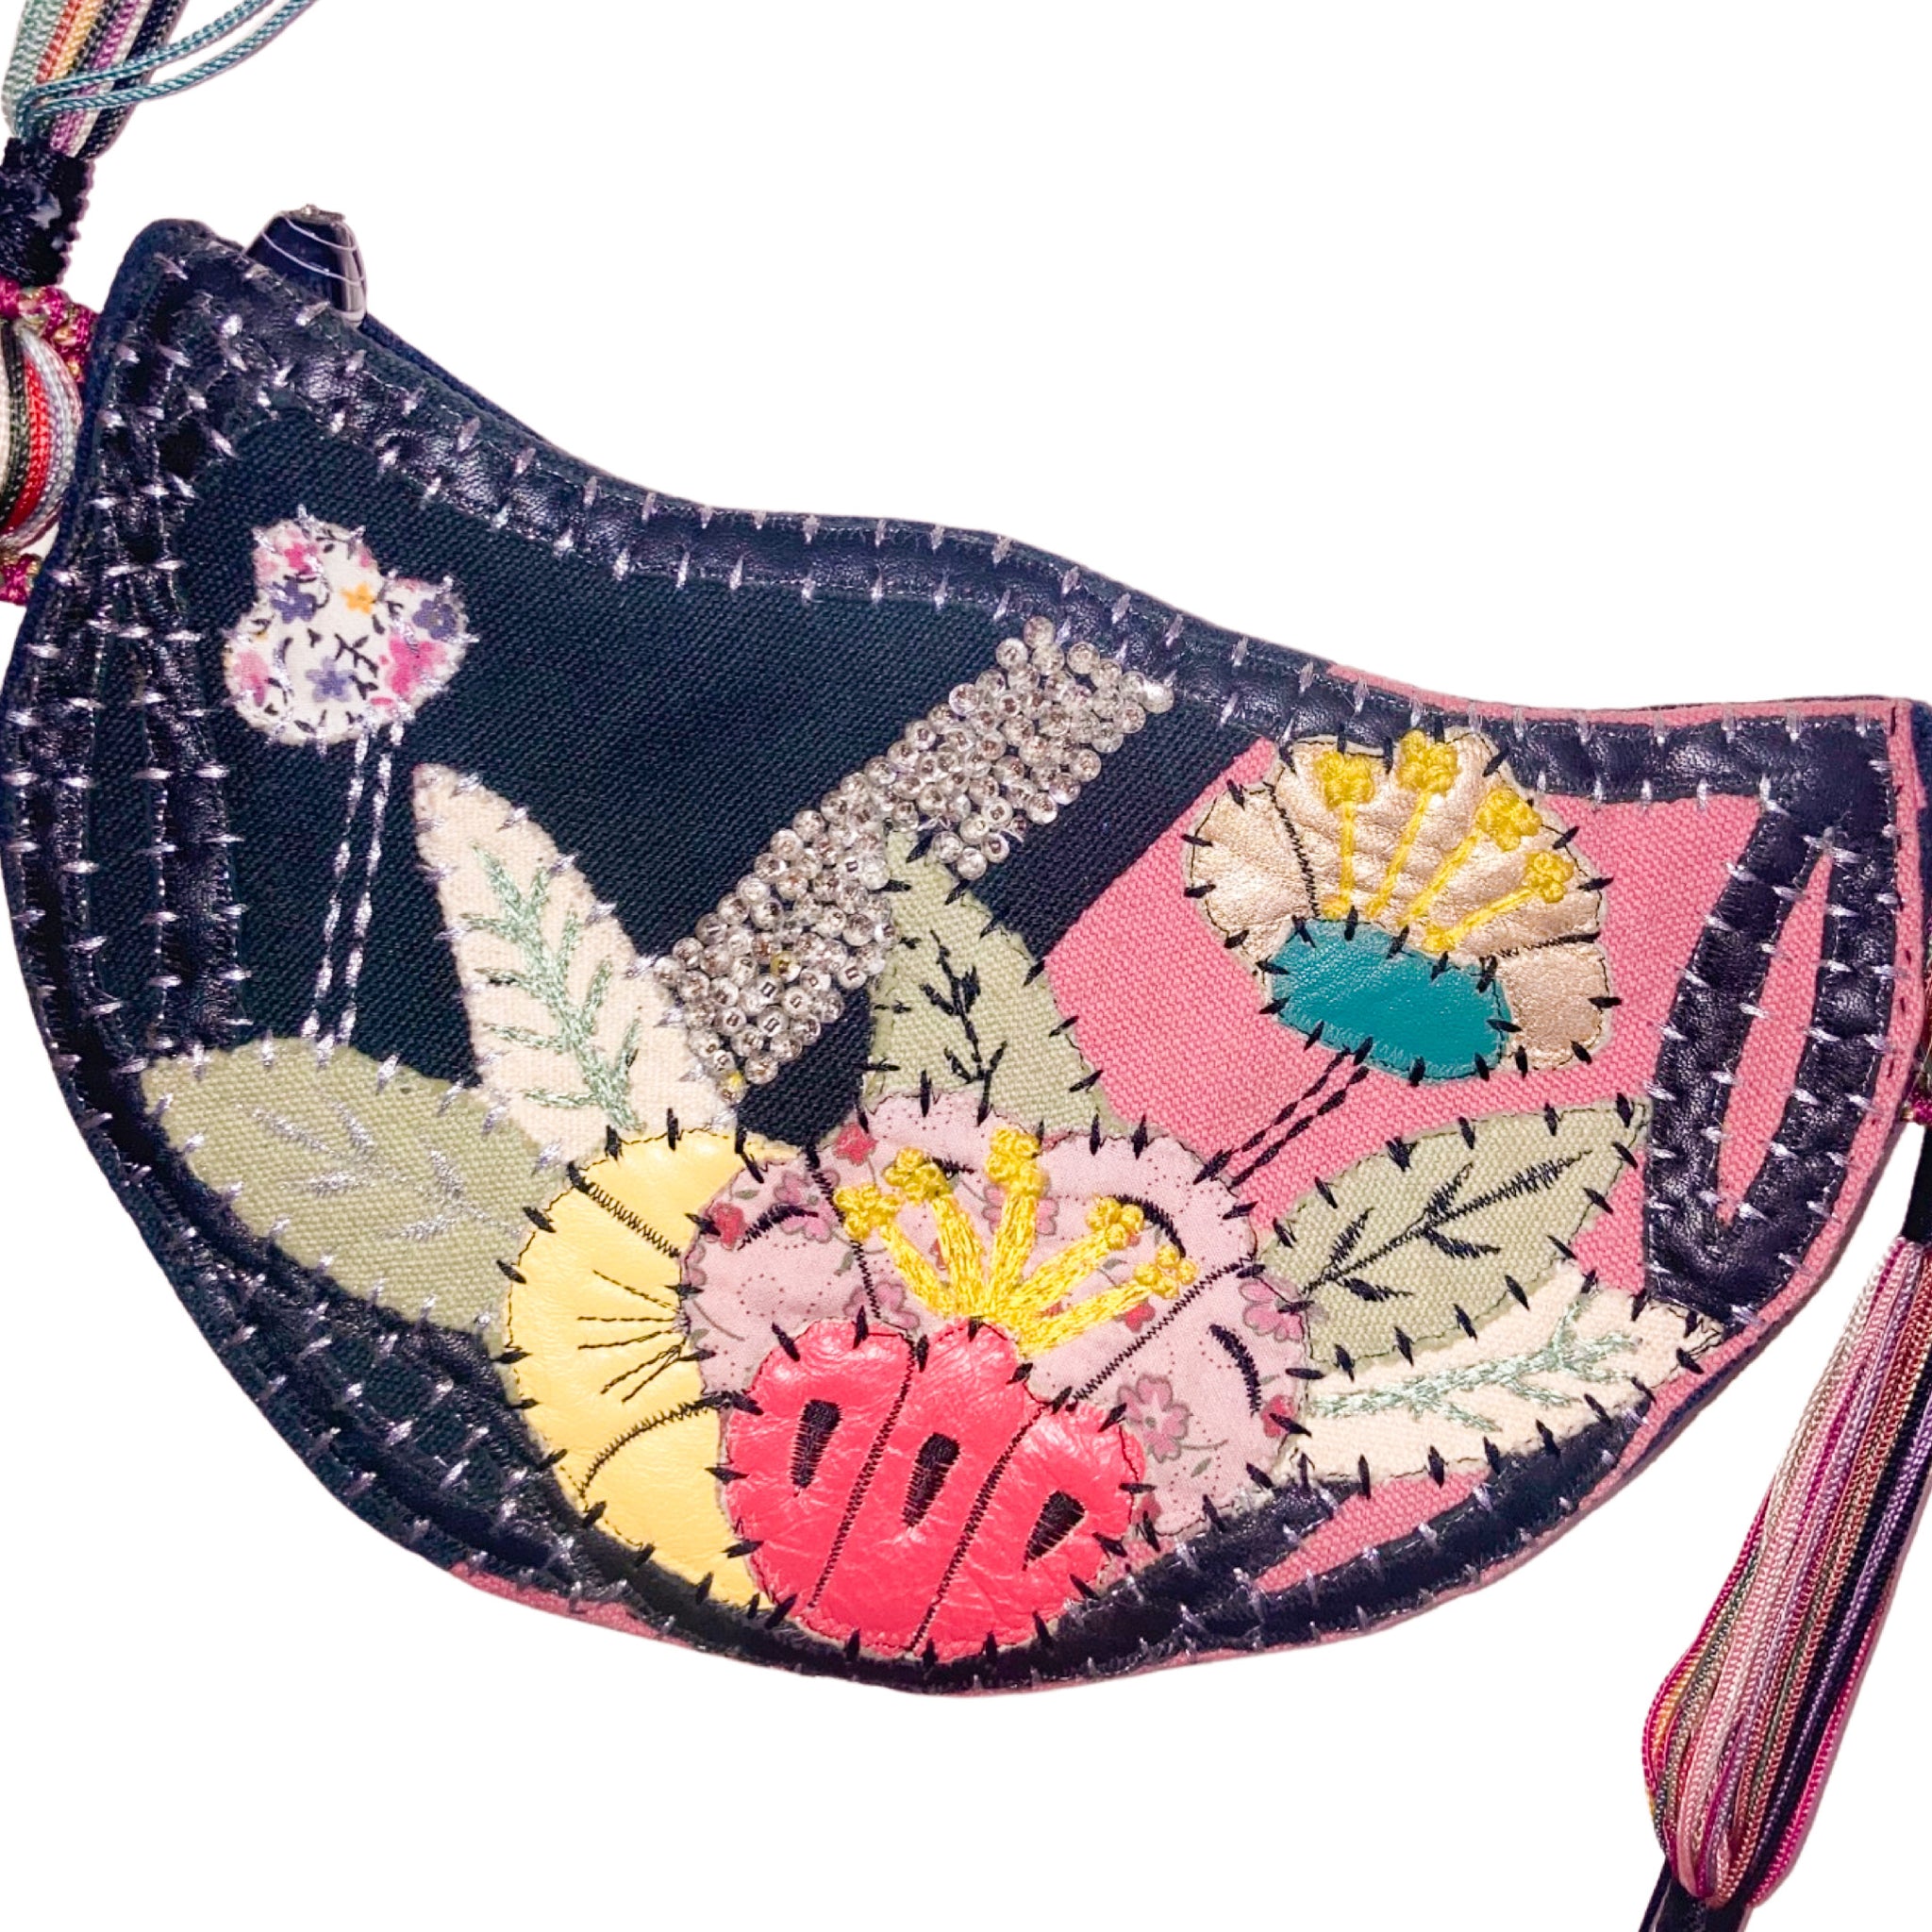 Christian Lacroix 2000's embroidered bag + belt